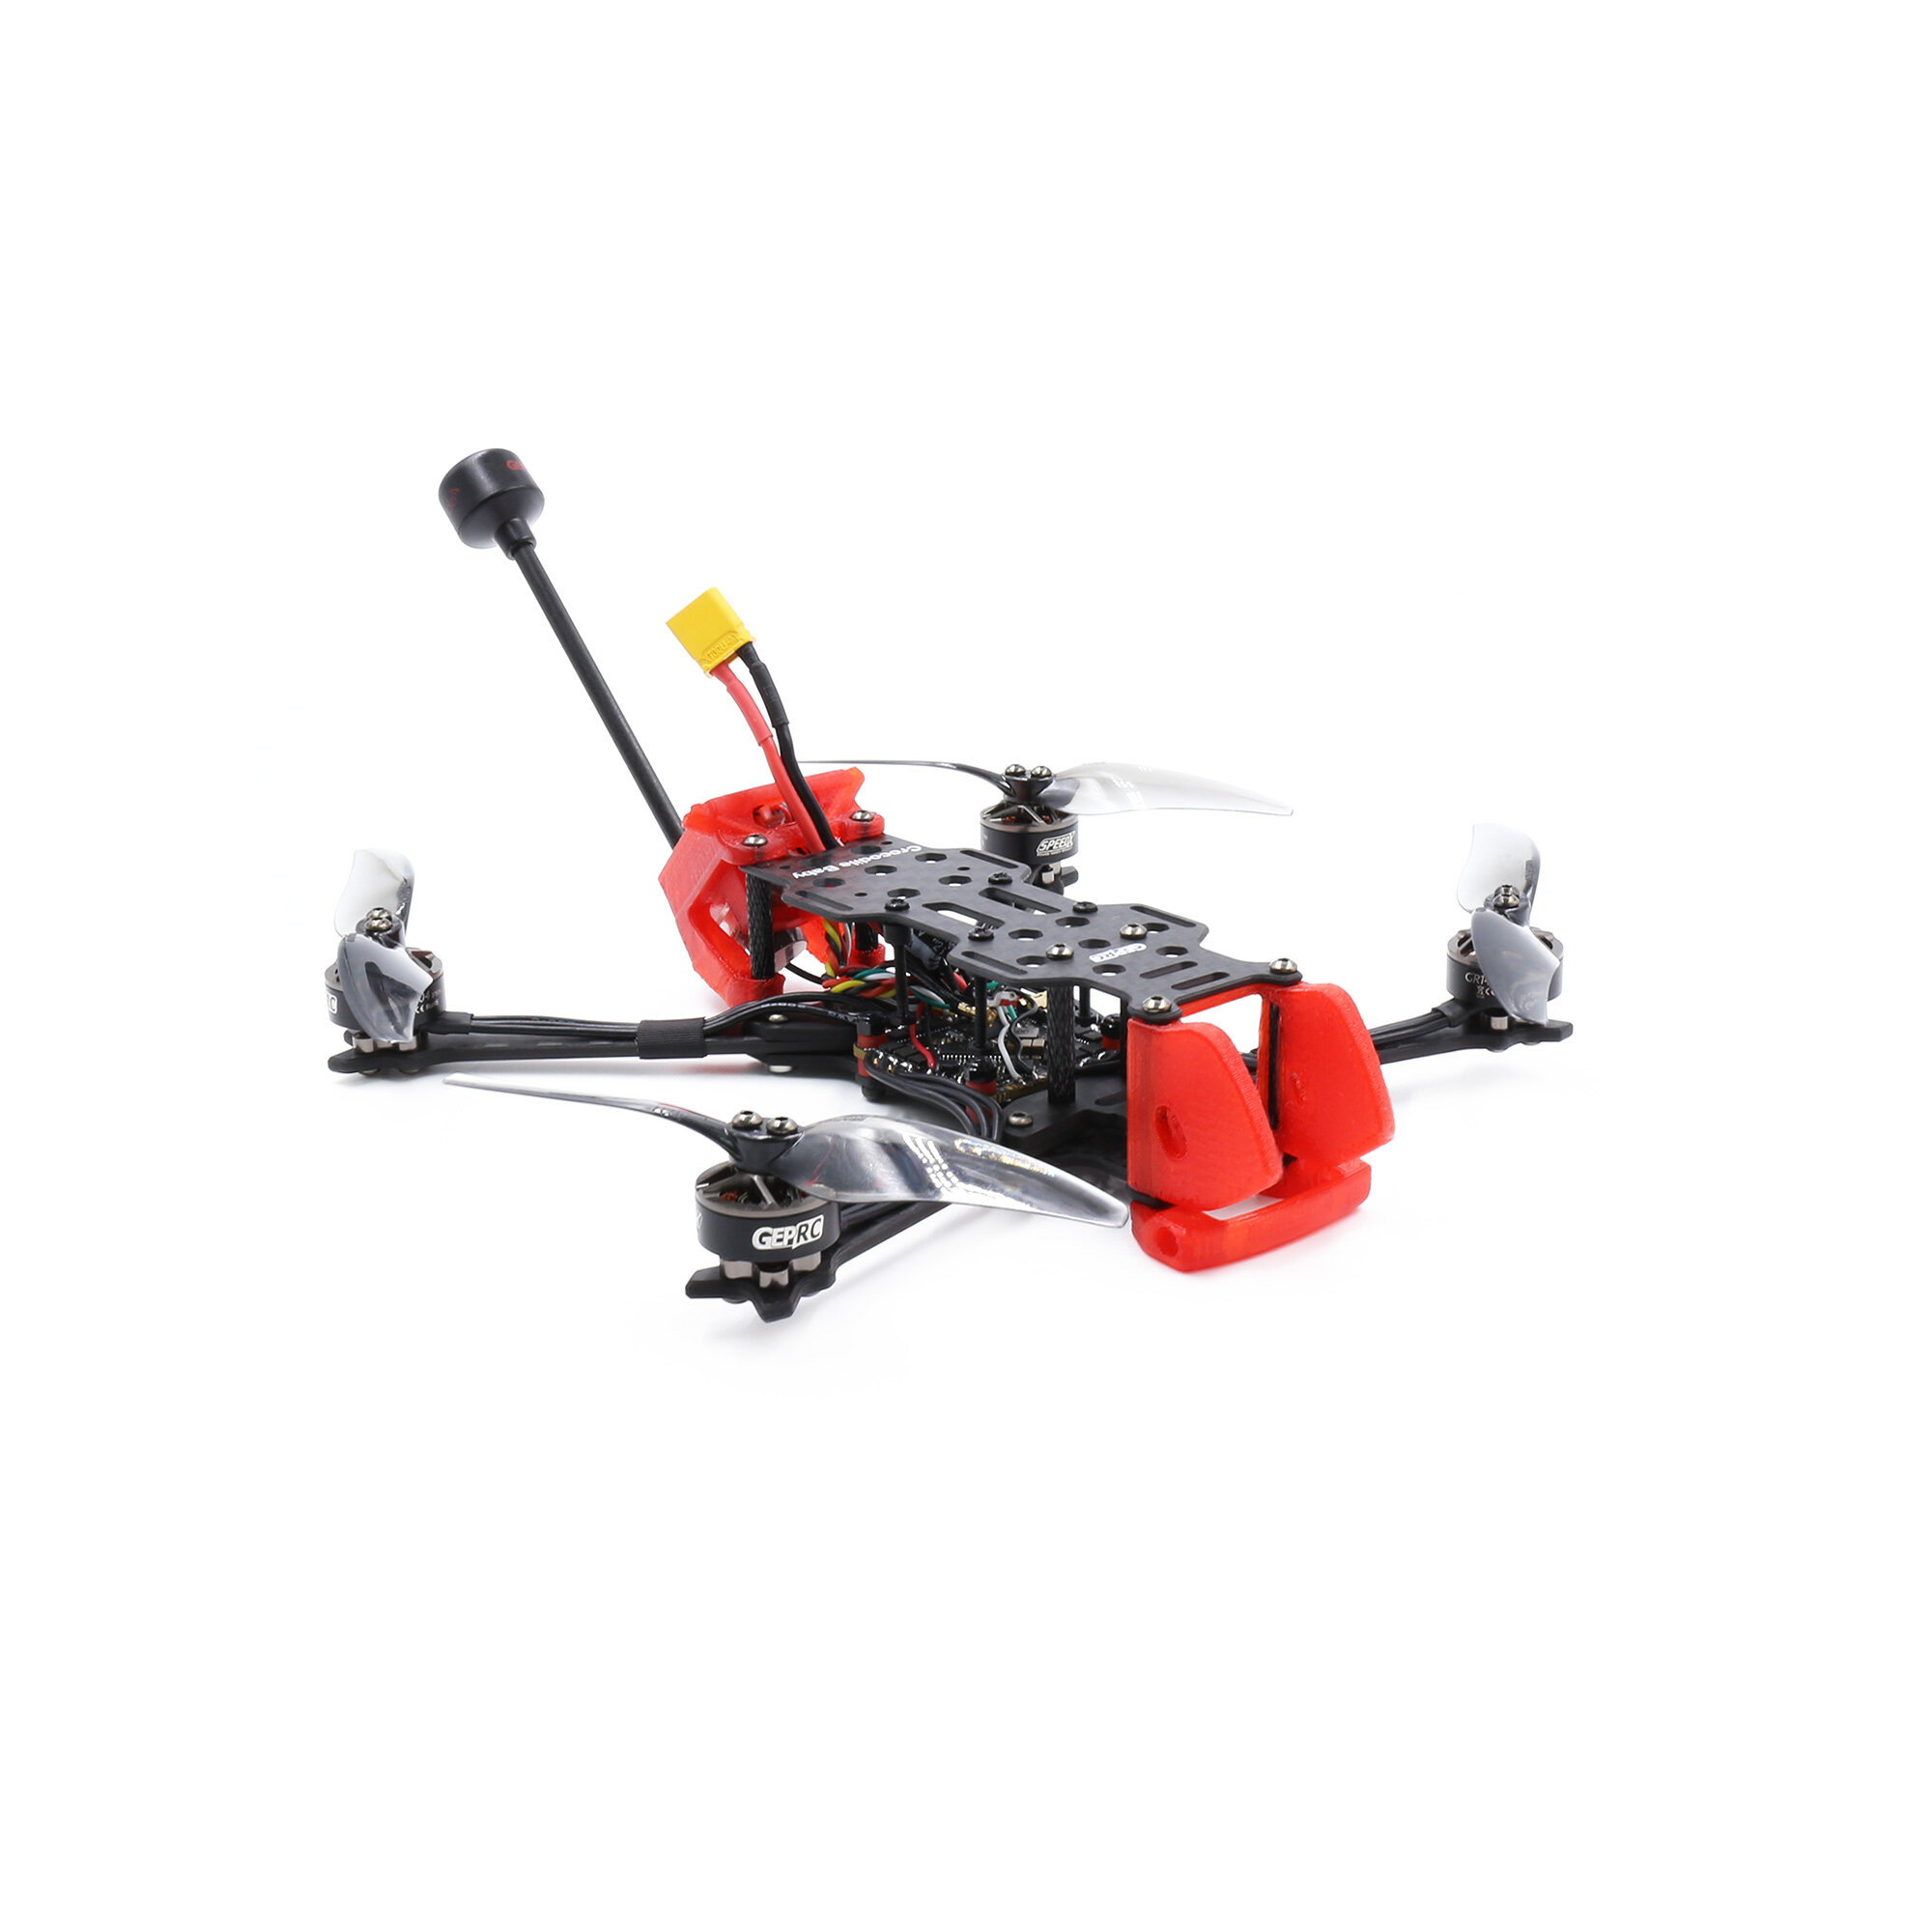 

GEPRC Crocodile Baby 4 Inch 4S LR Micro Long Range FPV Racing Drone PNP/BNF Without FPV System F4 FC 20A ESC 1404 2750KV